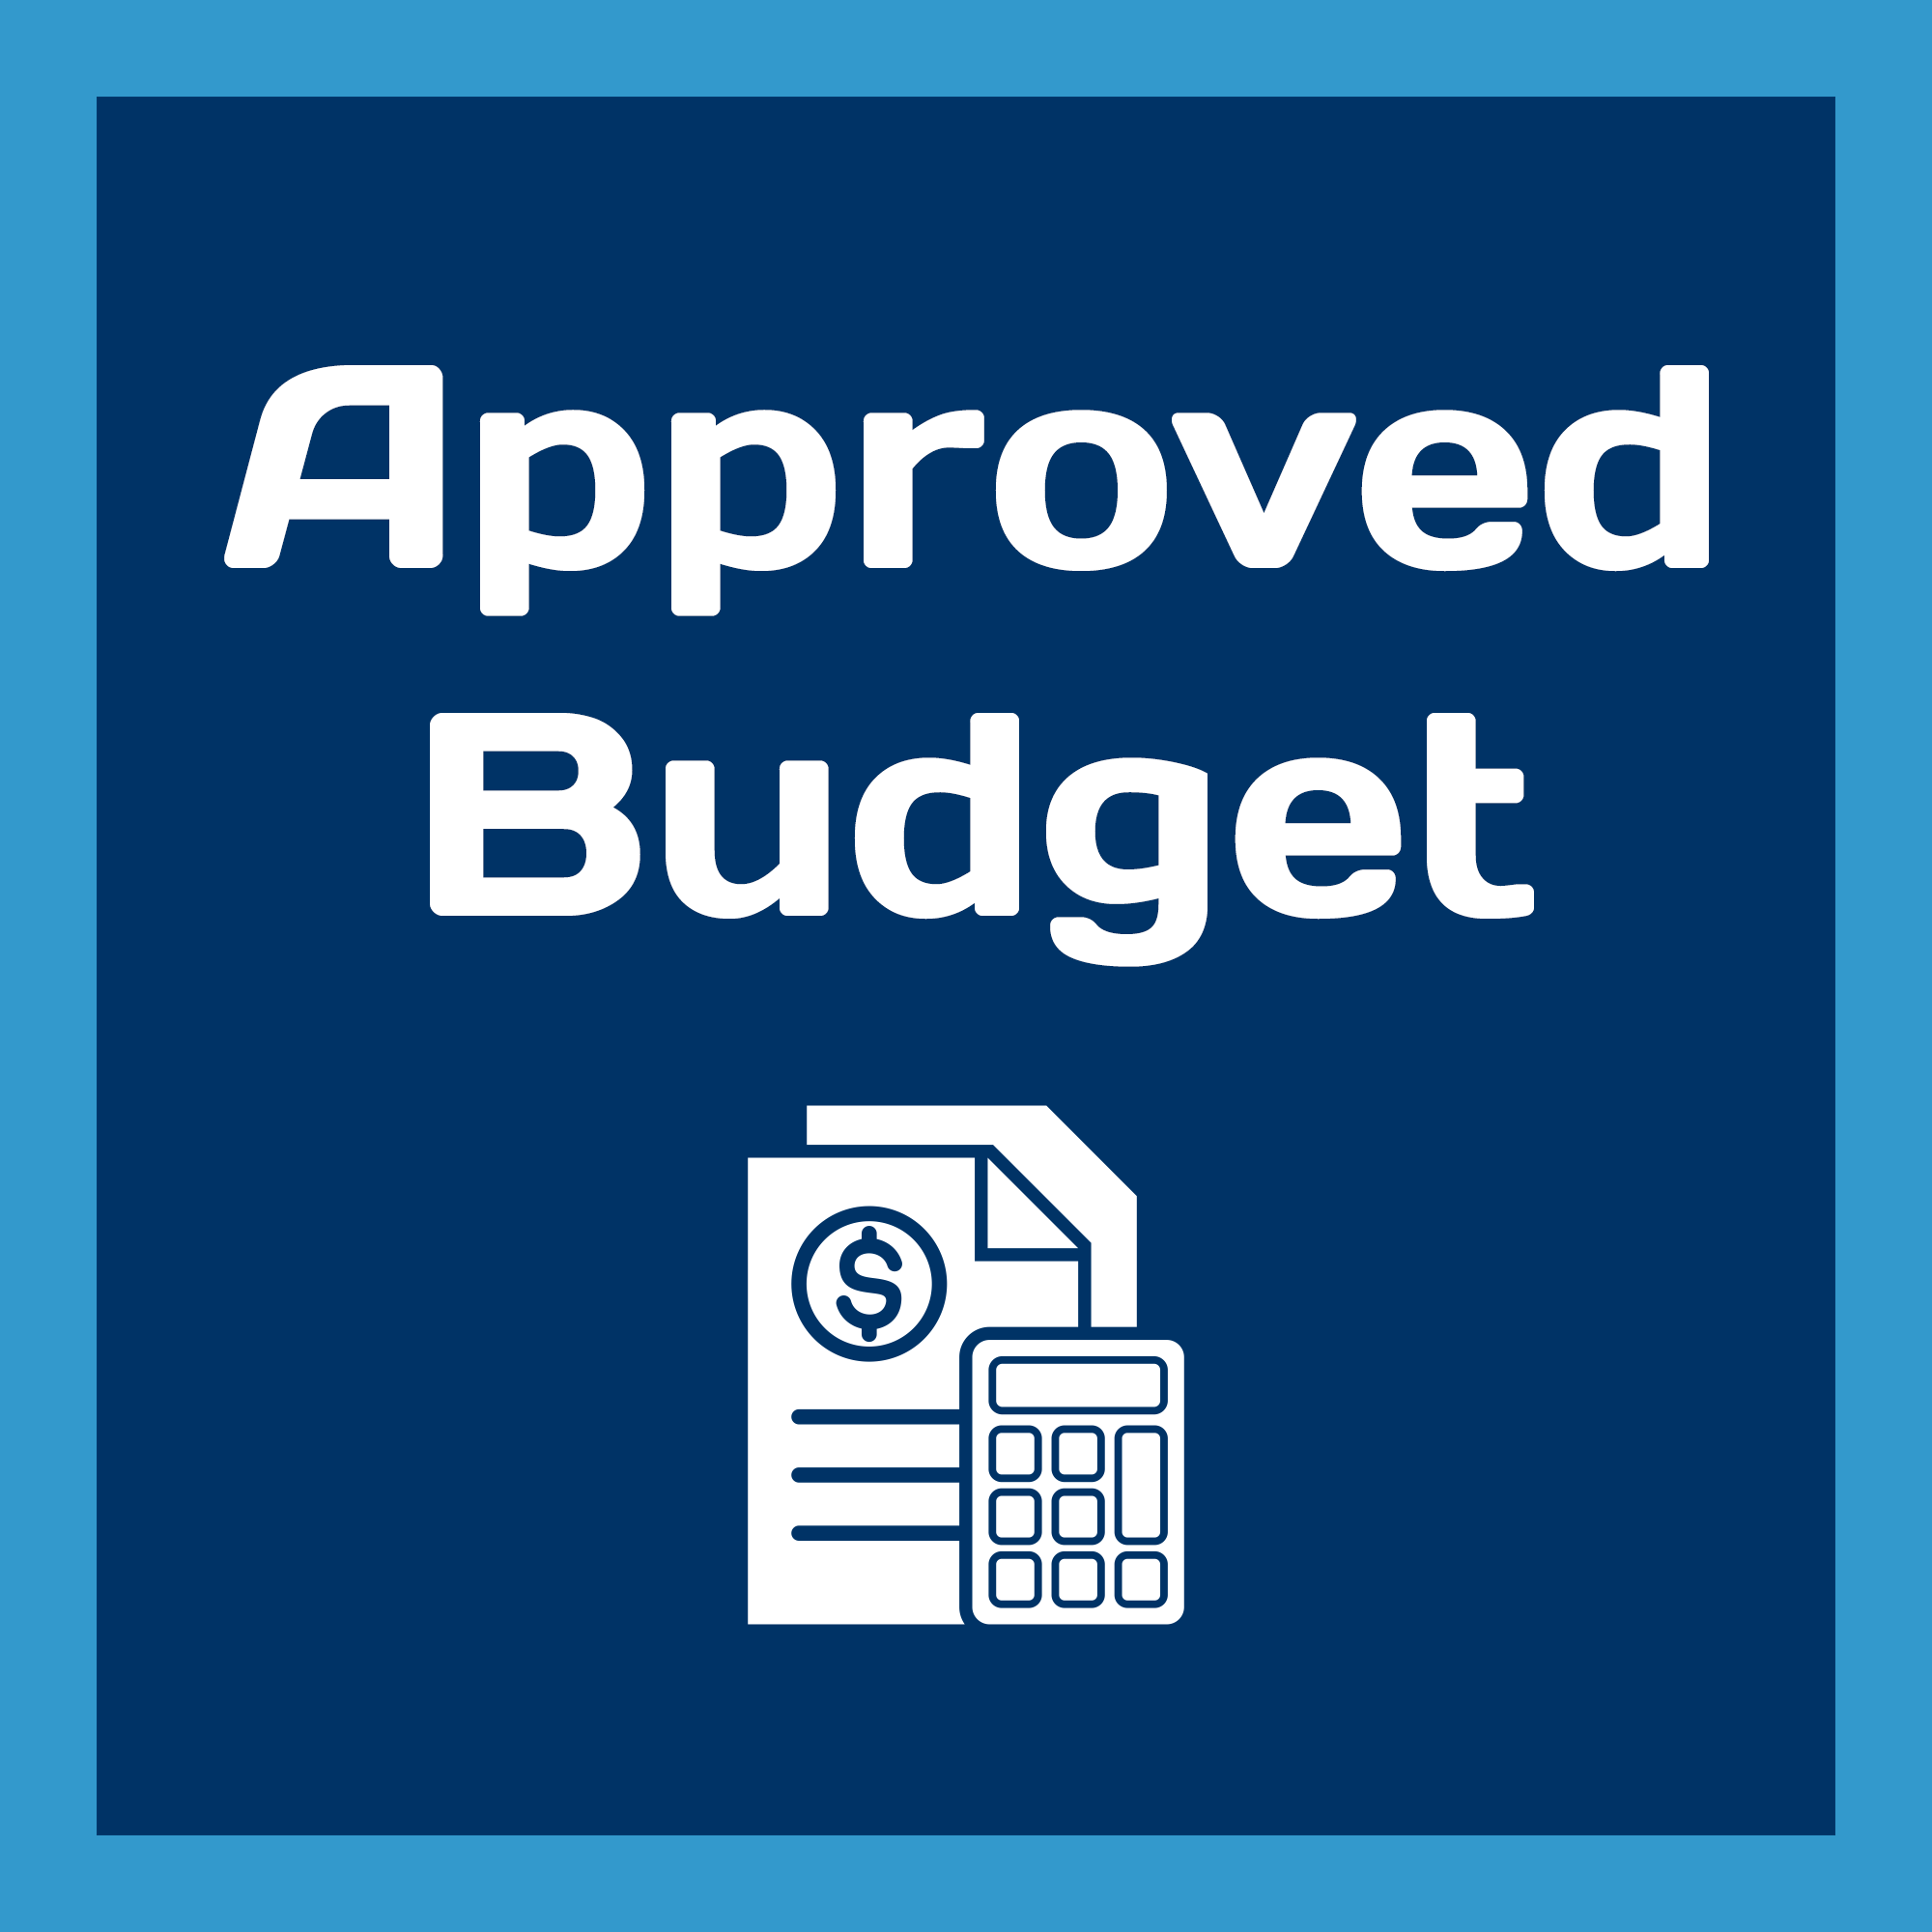 Approved Budget.png